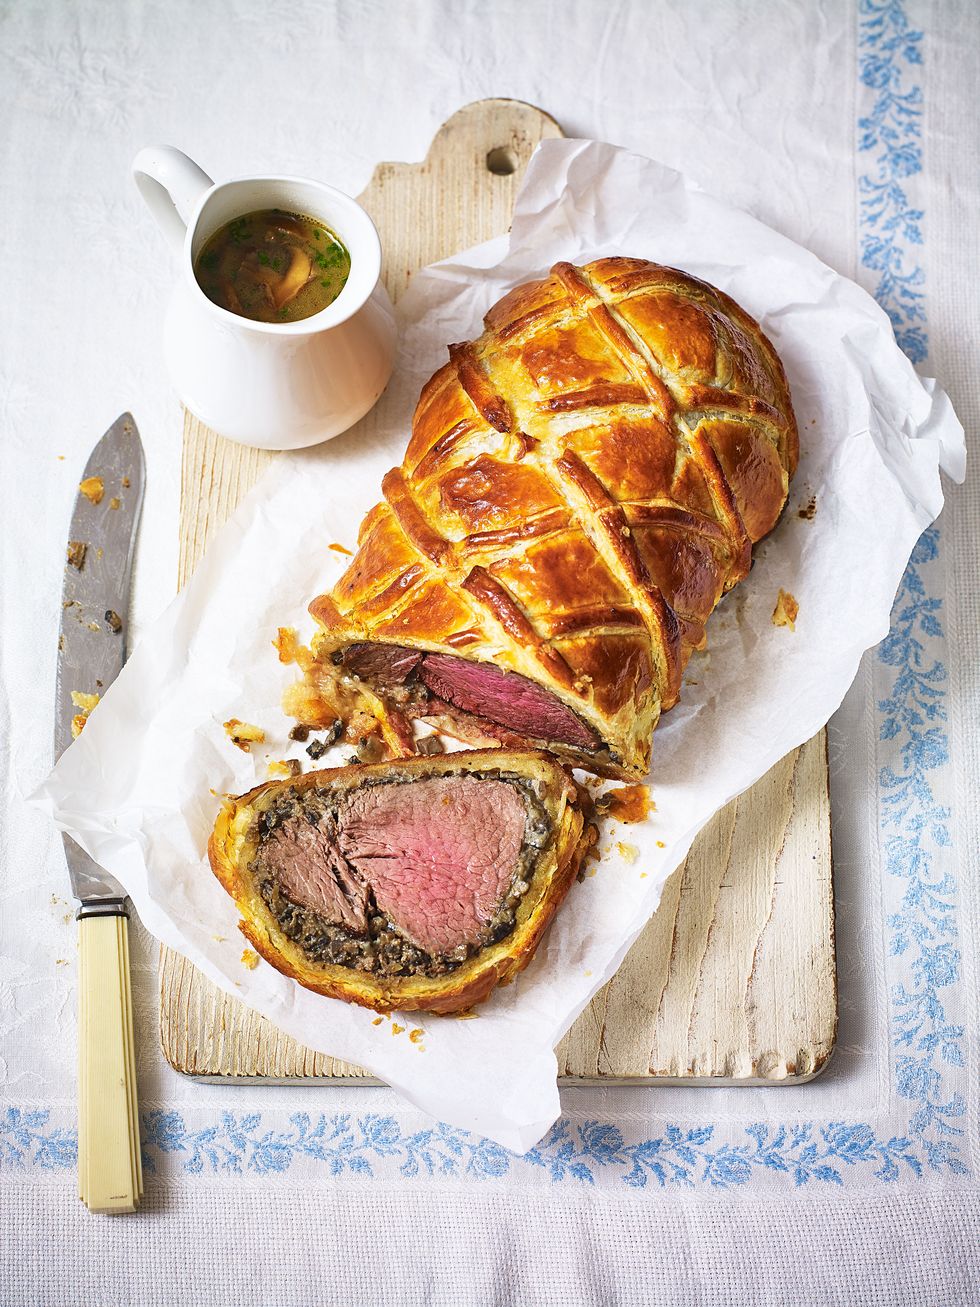 a medium rare beef wellington, sliced on a wooden board on a white and blue tablecloth